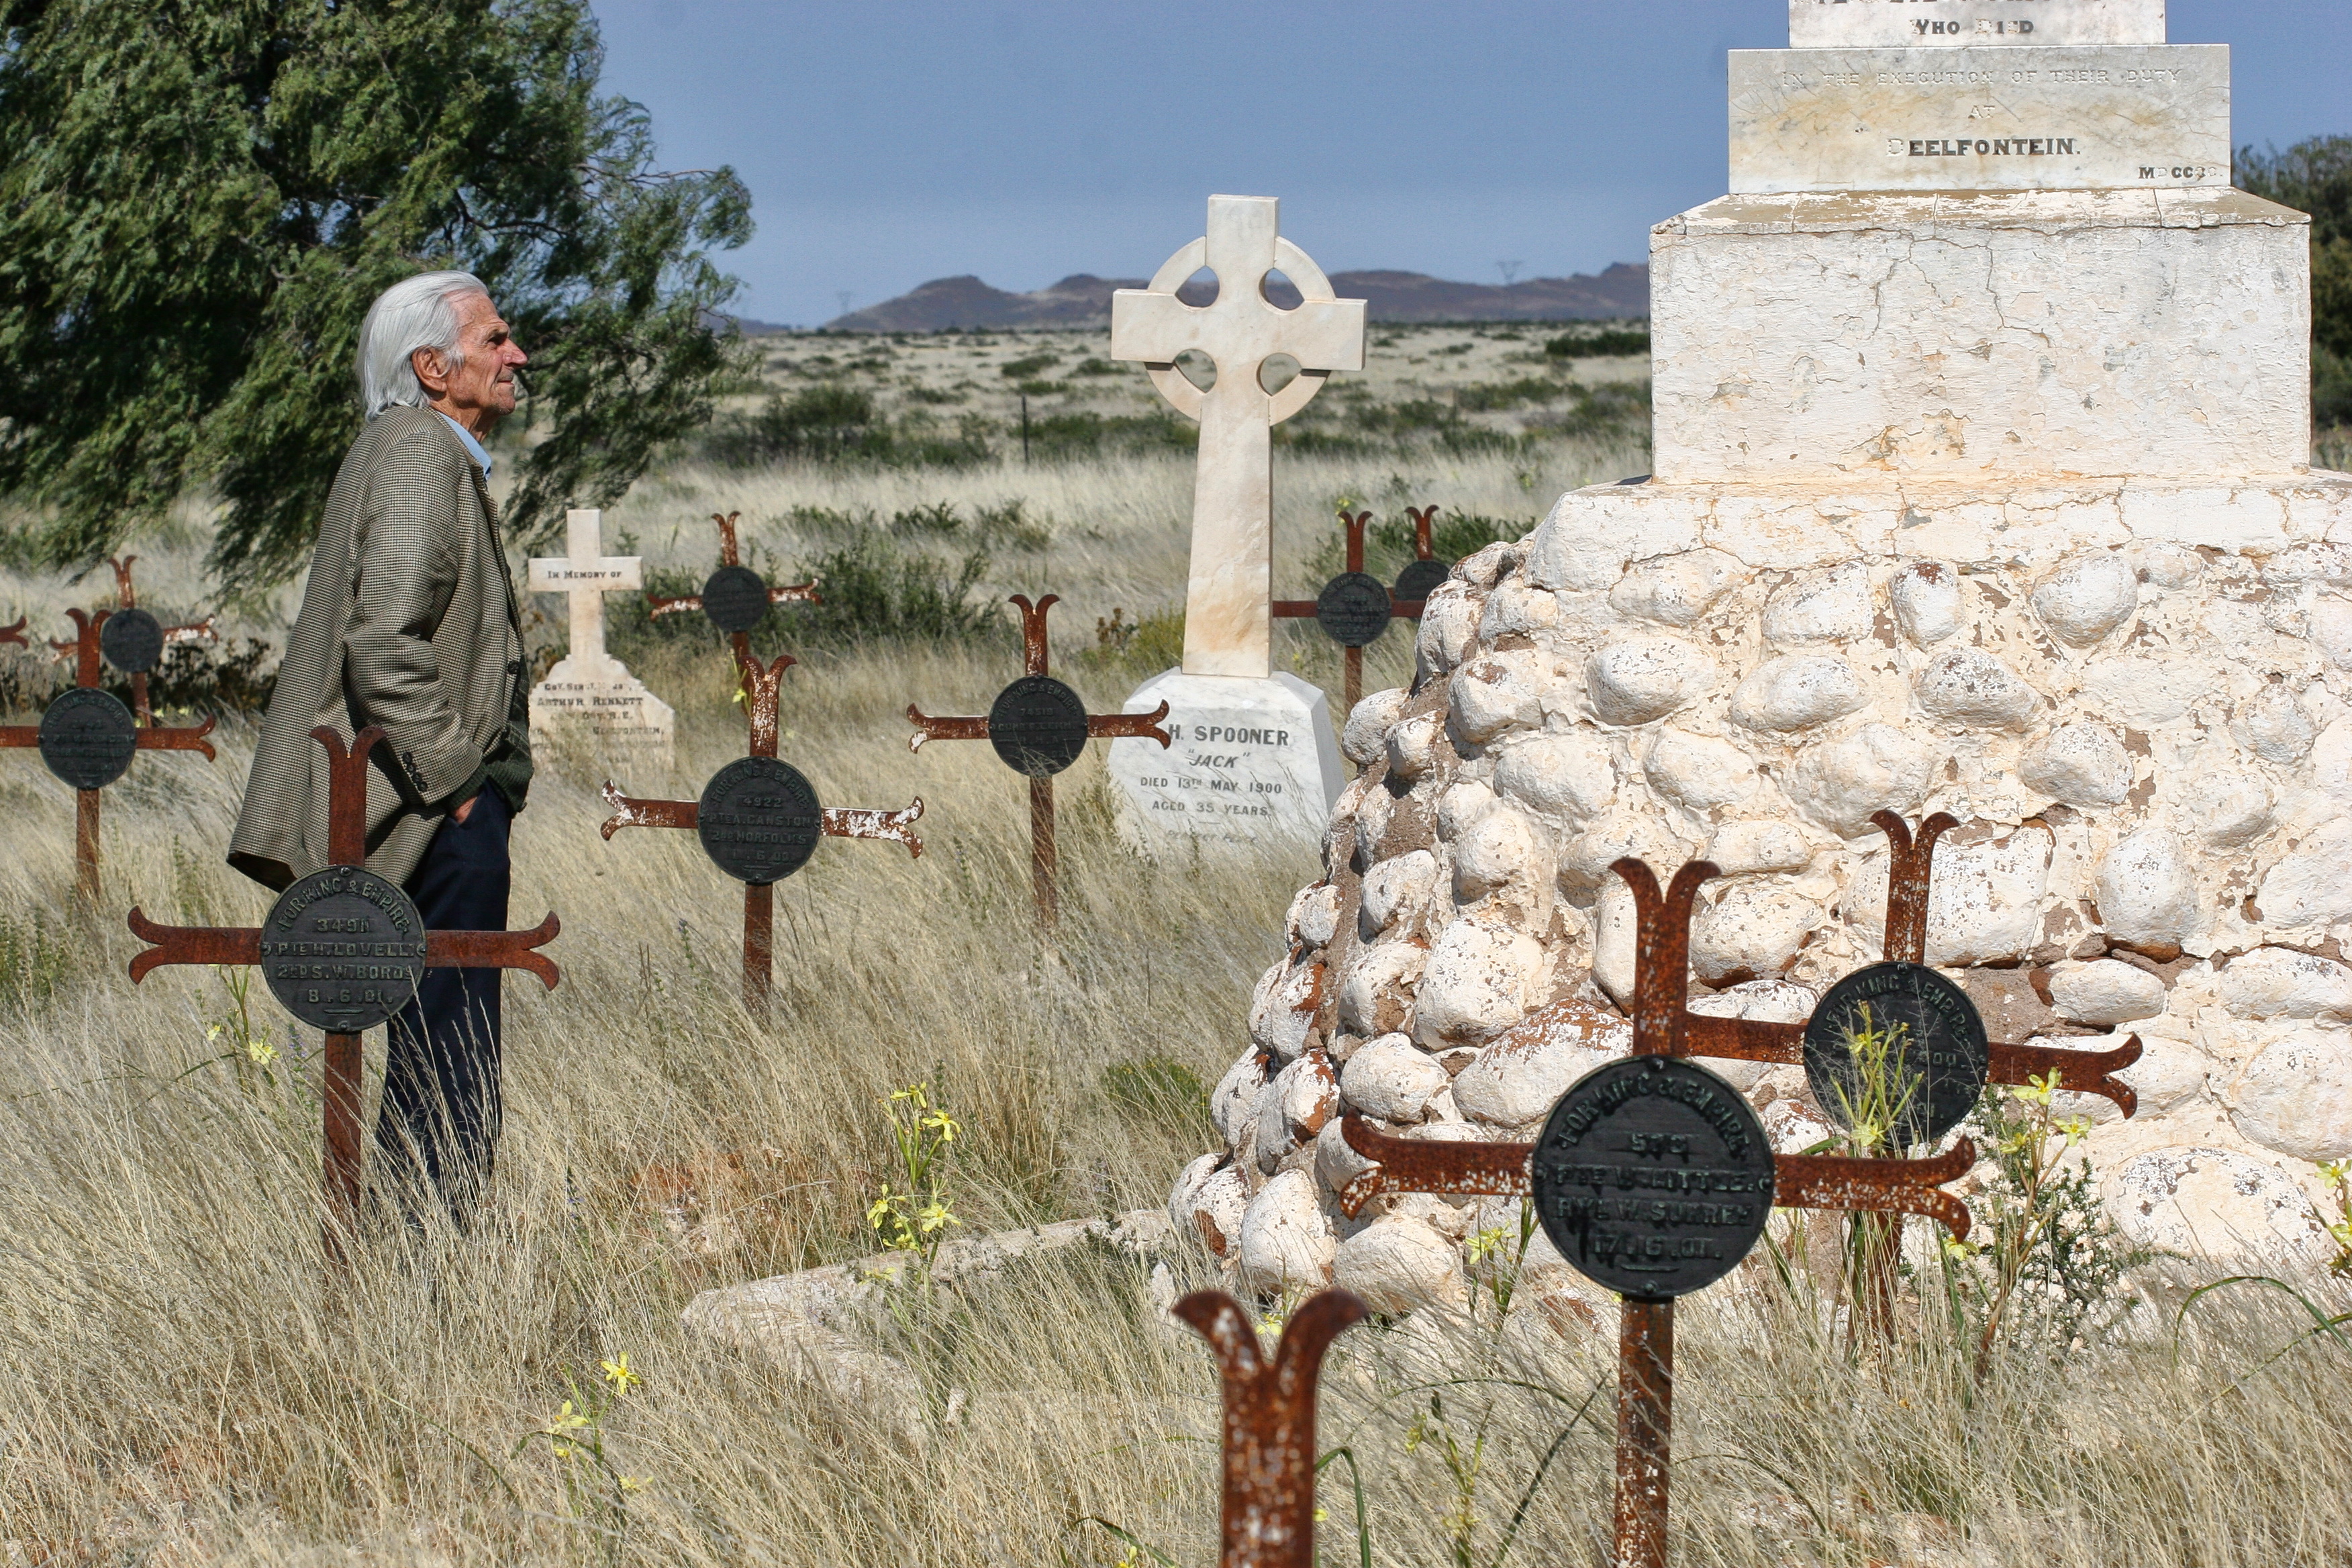 The late Percy Moss, lost in memories at the Deelfontein cemetery.